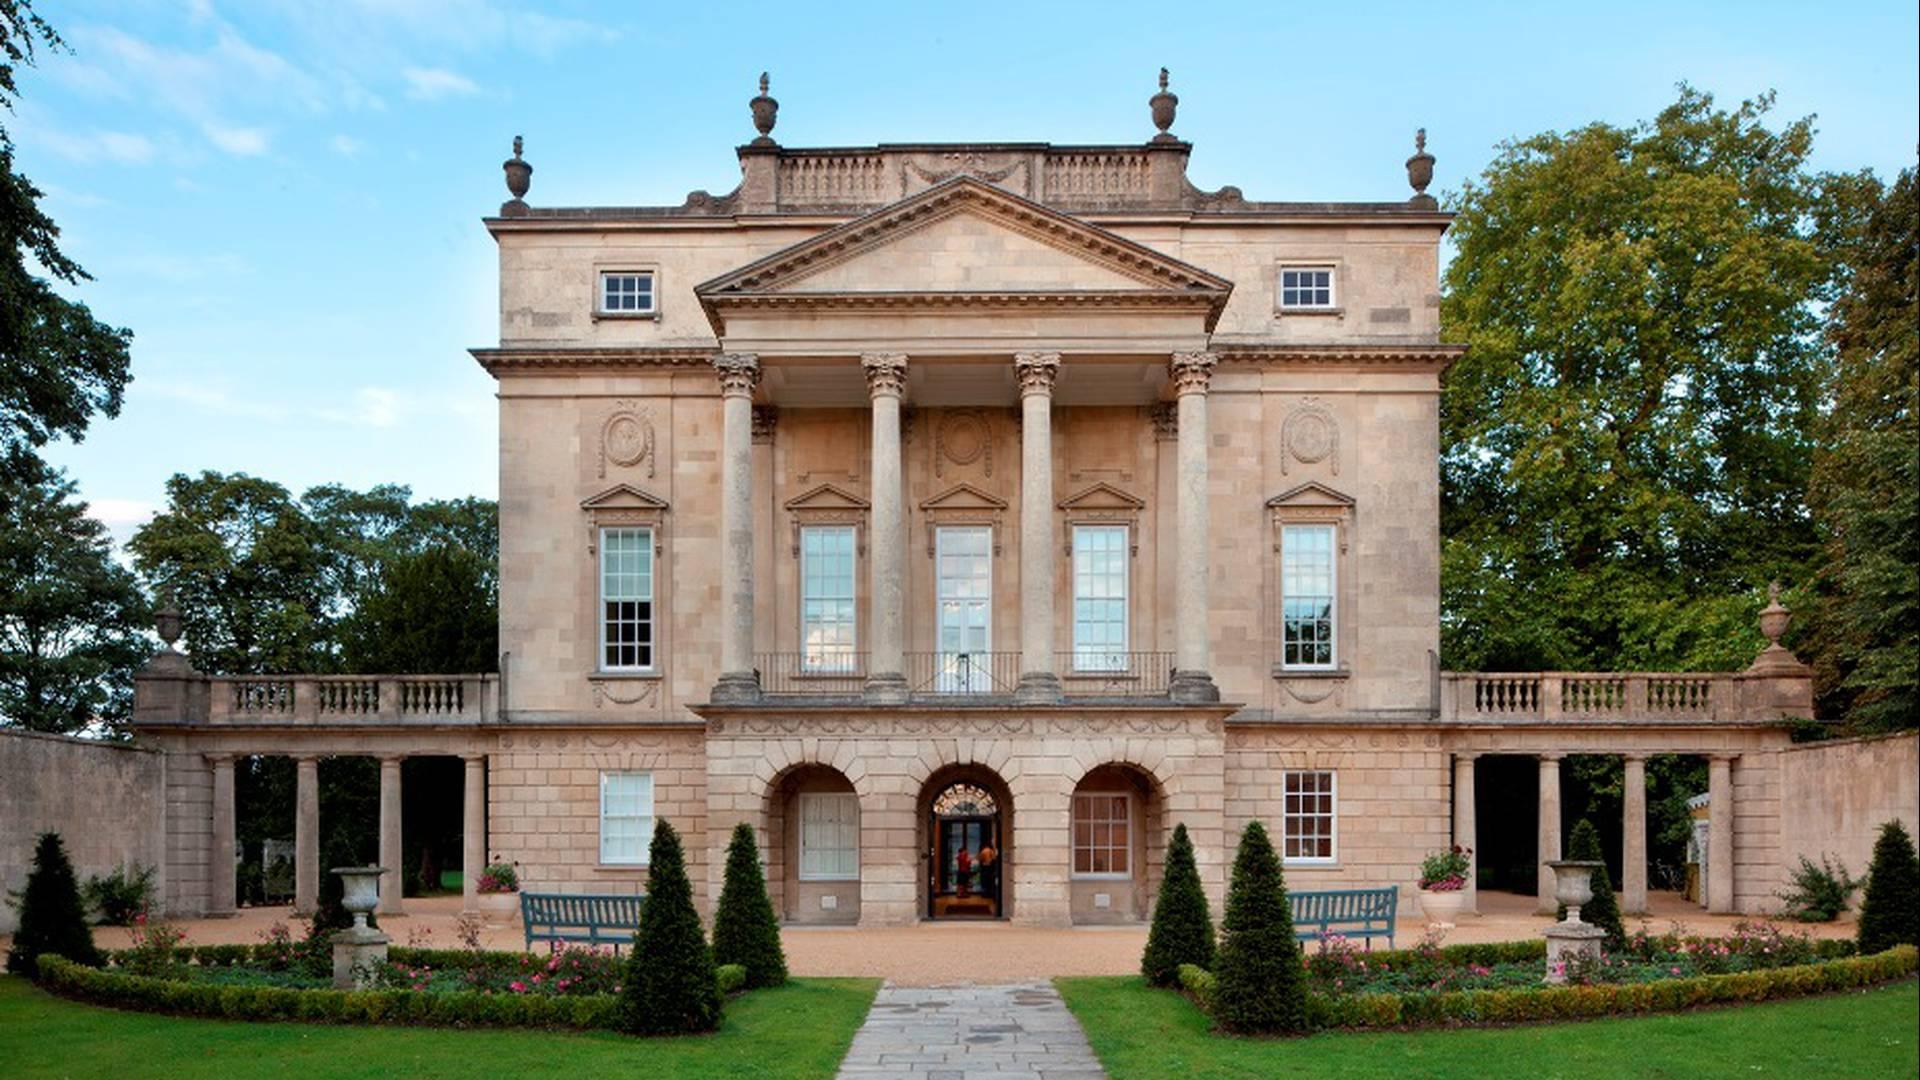 The Holburne Museum photo